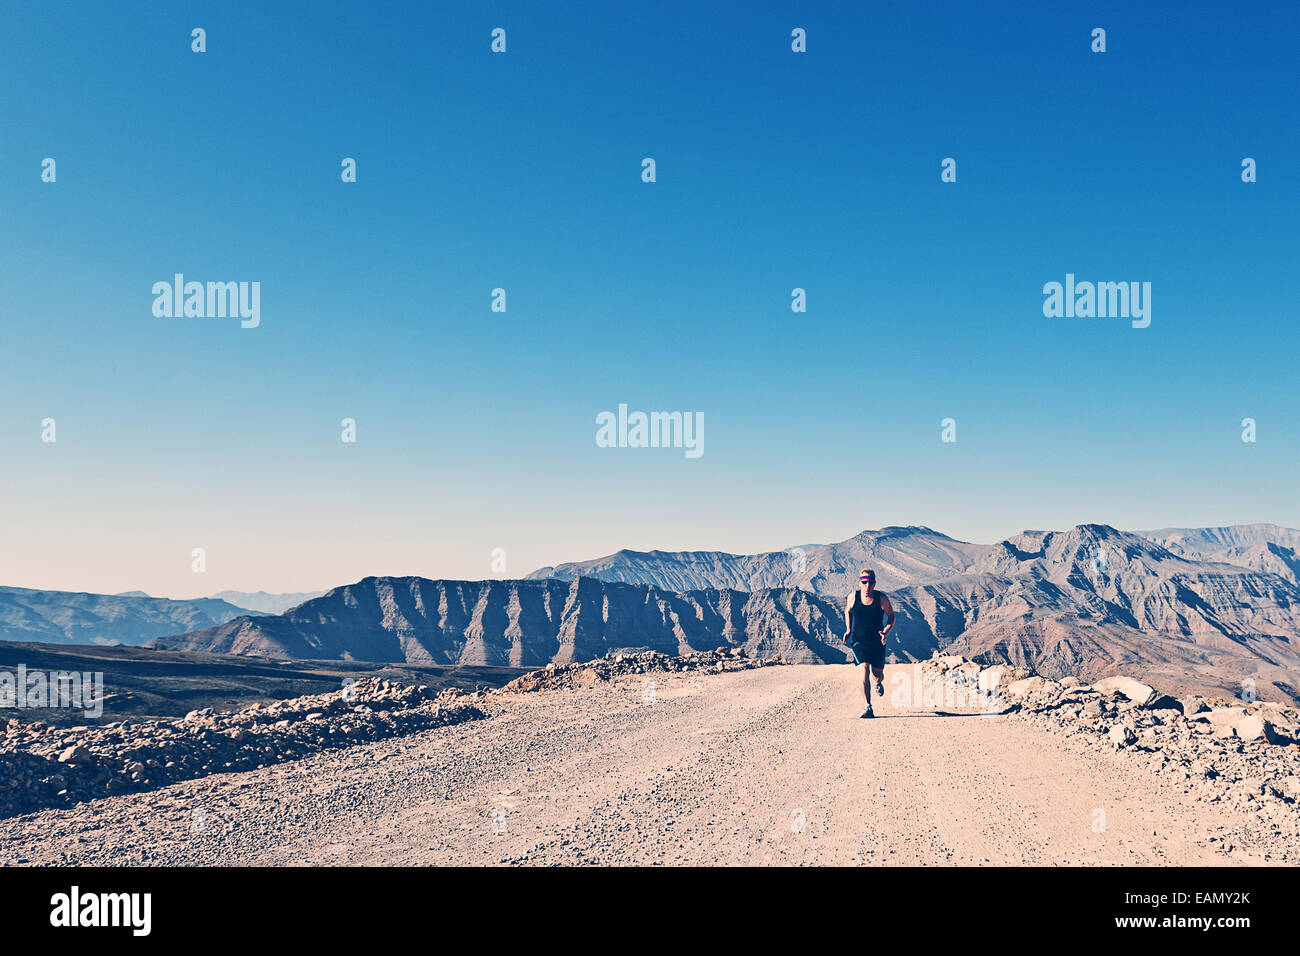 Shot of a Man Running on Mountain Road Stock Photo